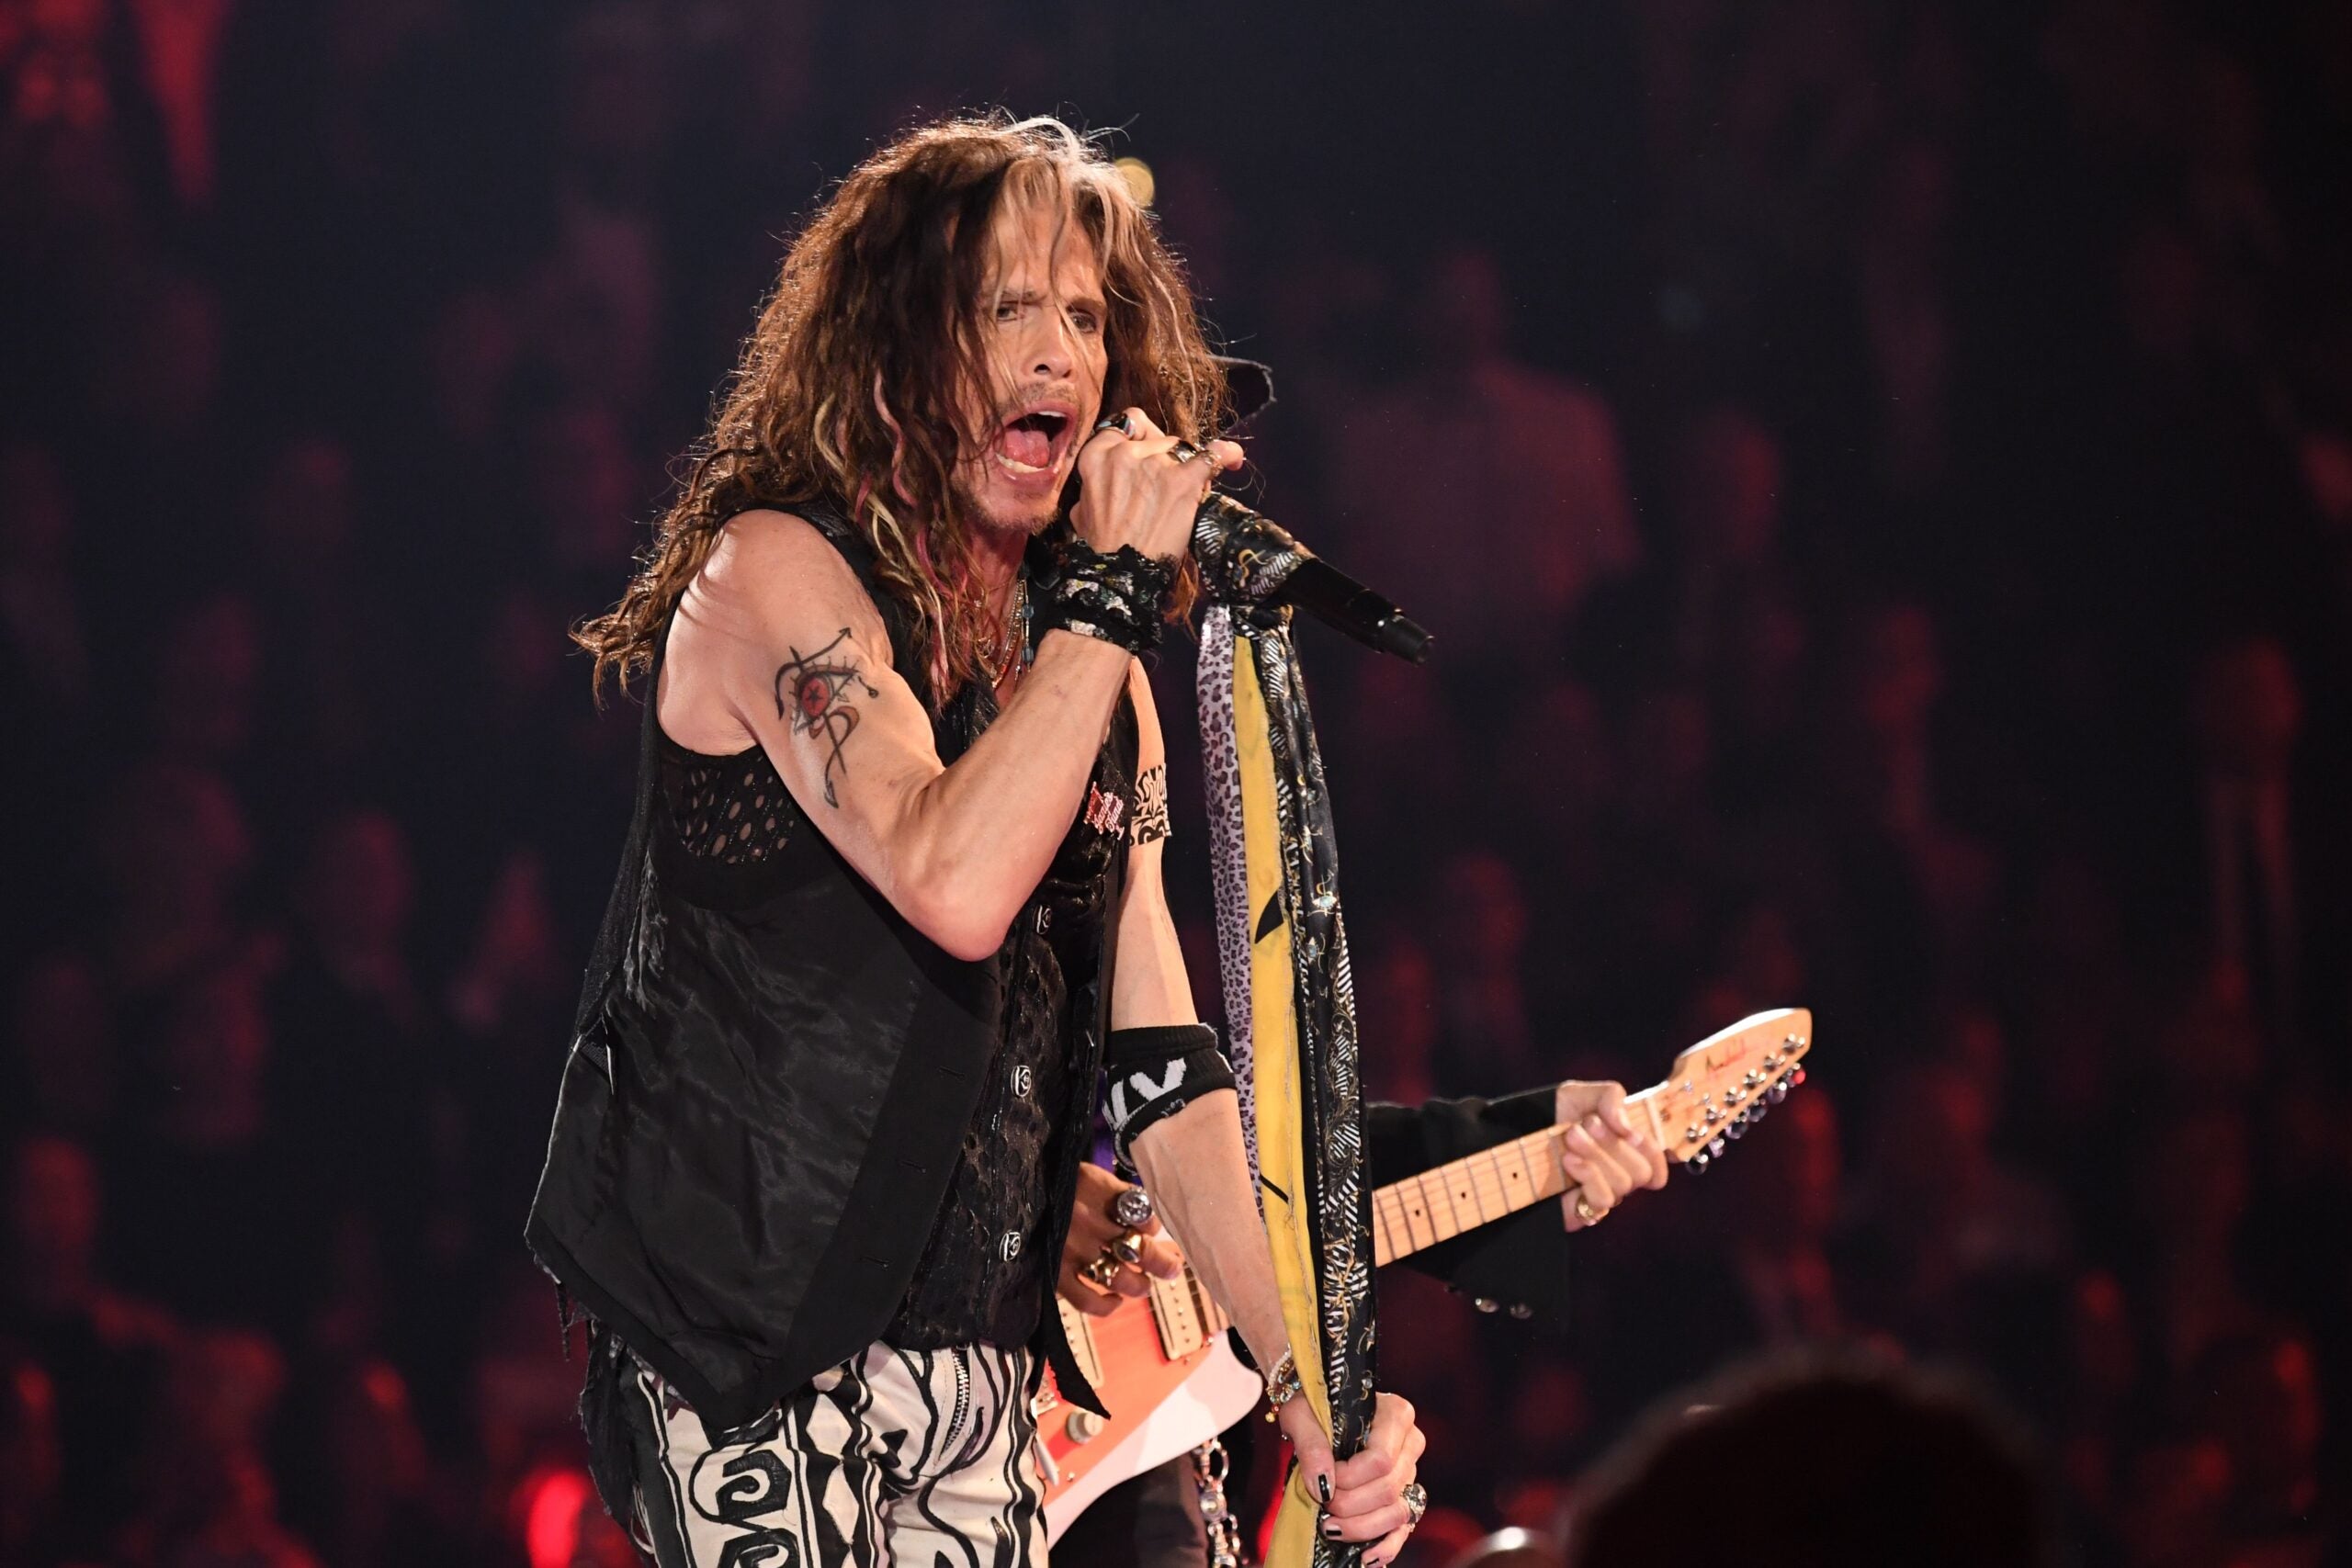 Aerosmith and New Kids on the Block are coming to Fenway Park this year